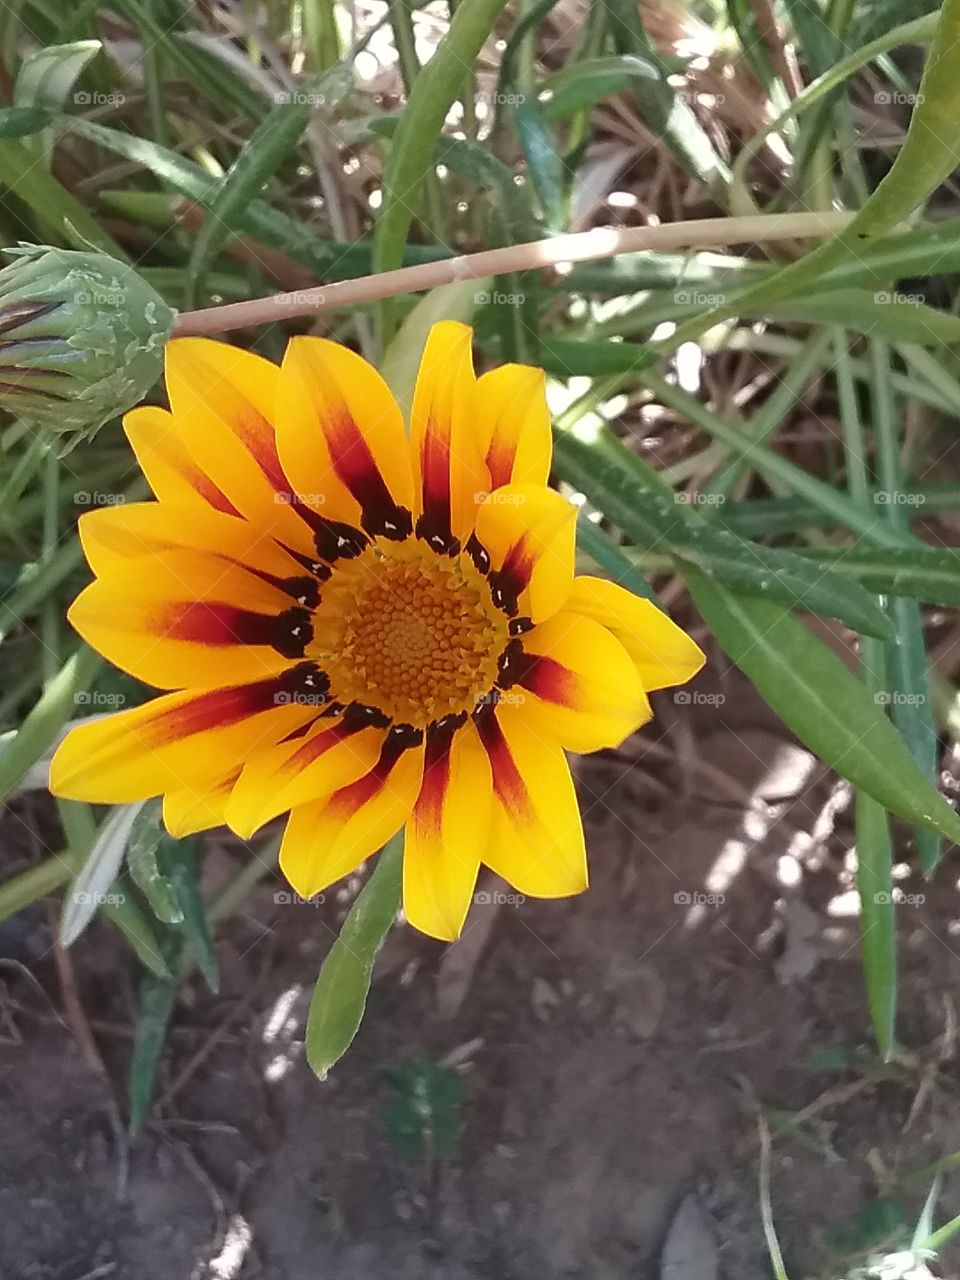 I really do like all the bright colors in this kind of flower.  Bright yellow, orange, red and Brown's with just enough black so you can see that tiny little white dot all the way around.